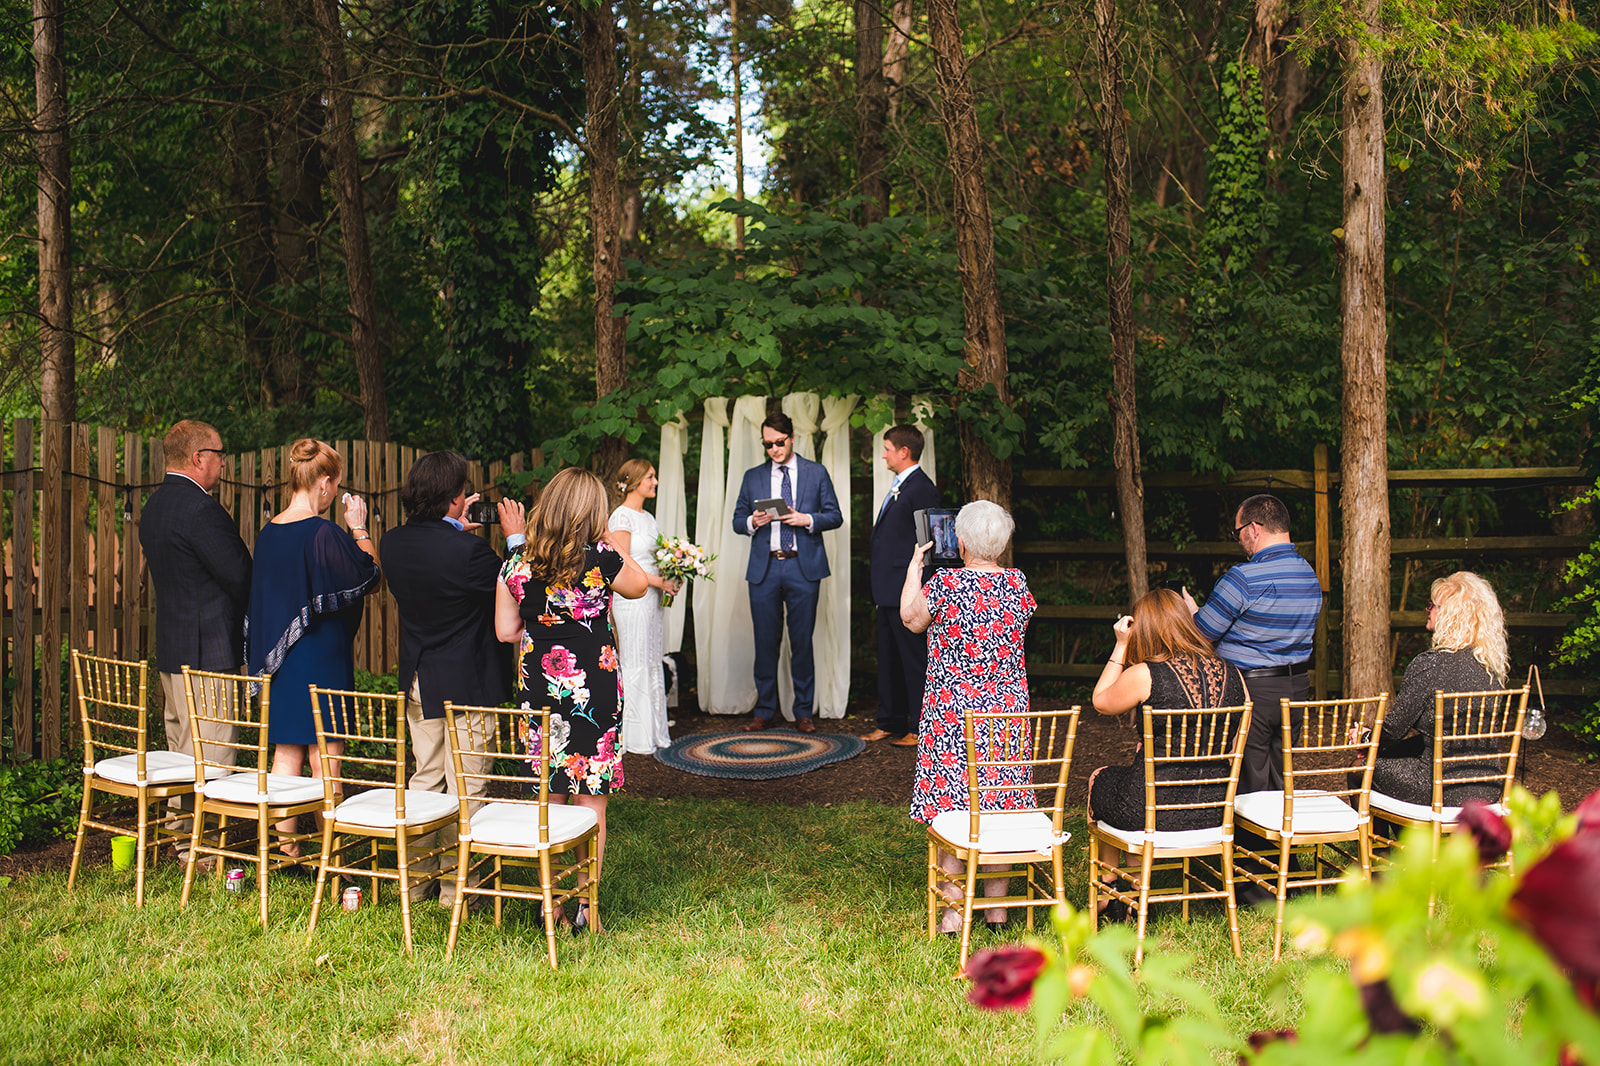 A loving couple exchanging vows during their intimate home elopement ceremony surrounded by immediate family.